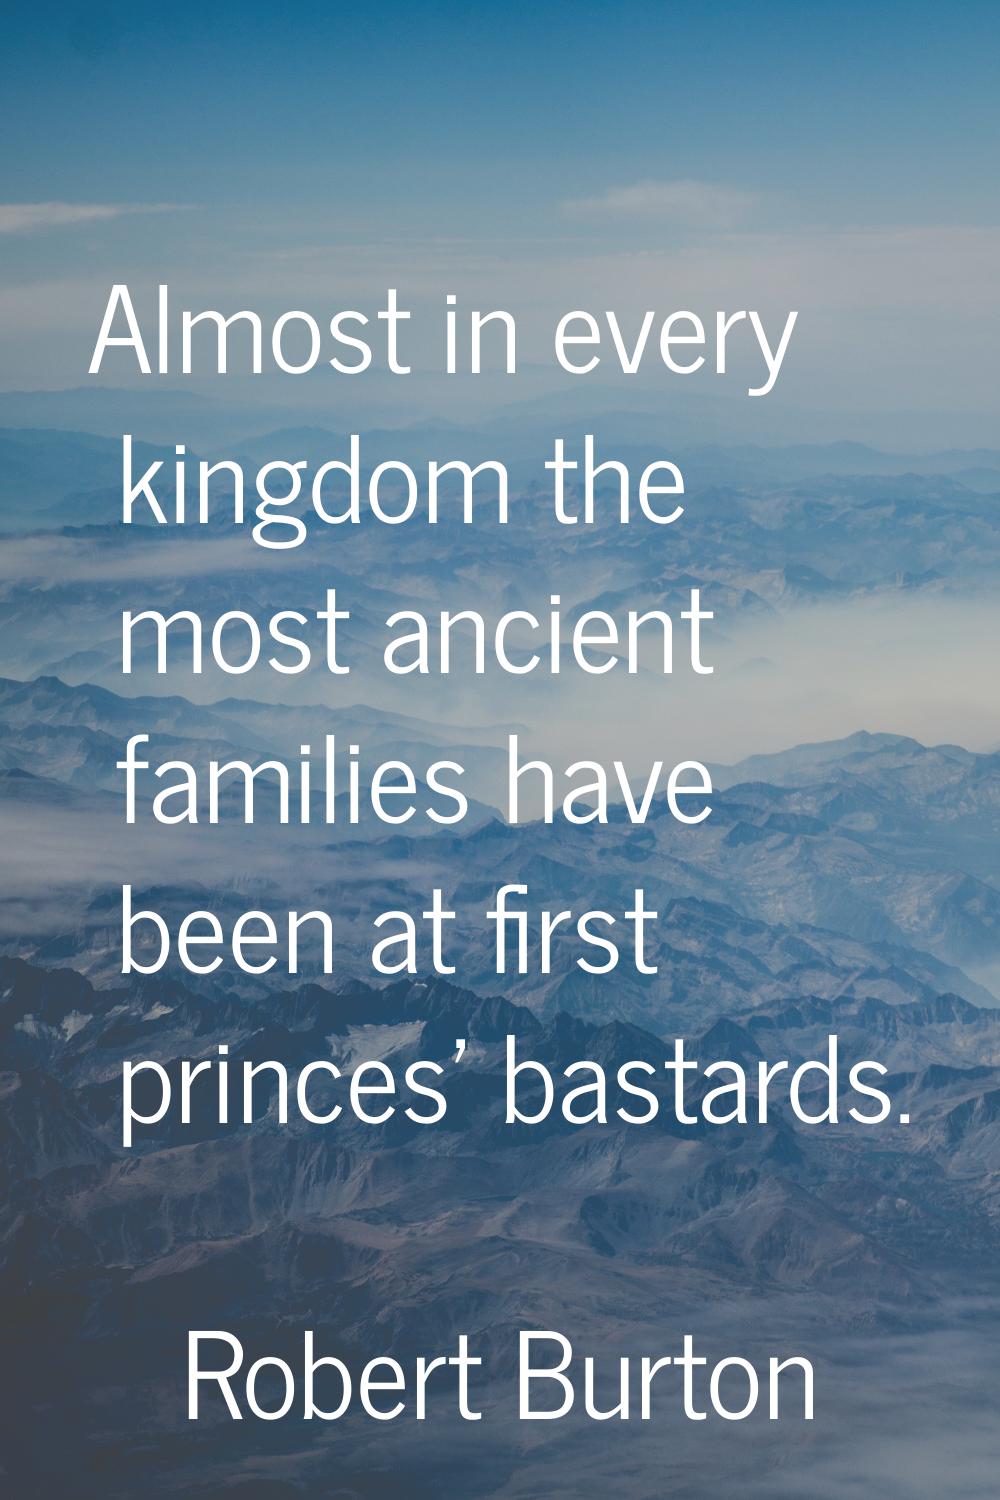 Almost in every kingdom the most ancient families have been at first princes' bastards.